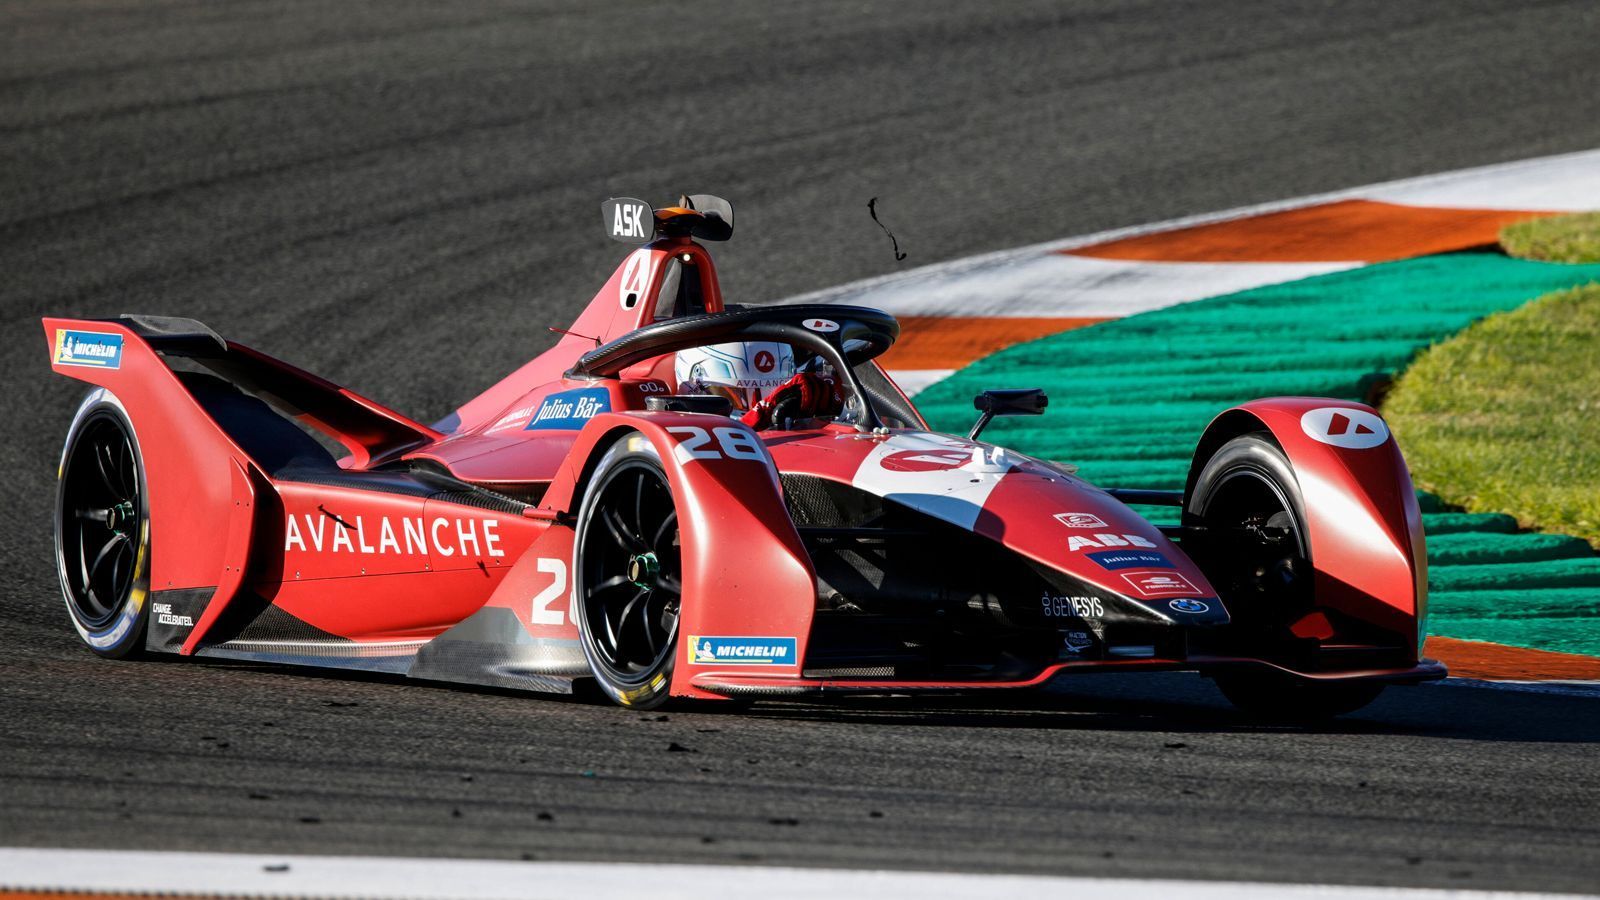 
                <strong>Avalanche Andretti Formula E</strong><br>
                &#x2022; Fahrer: Jake Dennis und Oliver Askew - <br>&#x2022; Antrieb: BMW IFE.21<br>
              